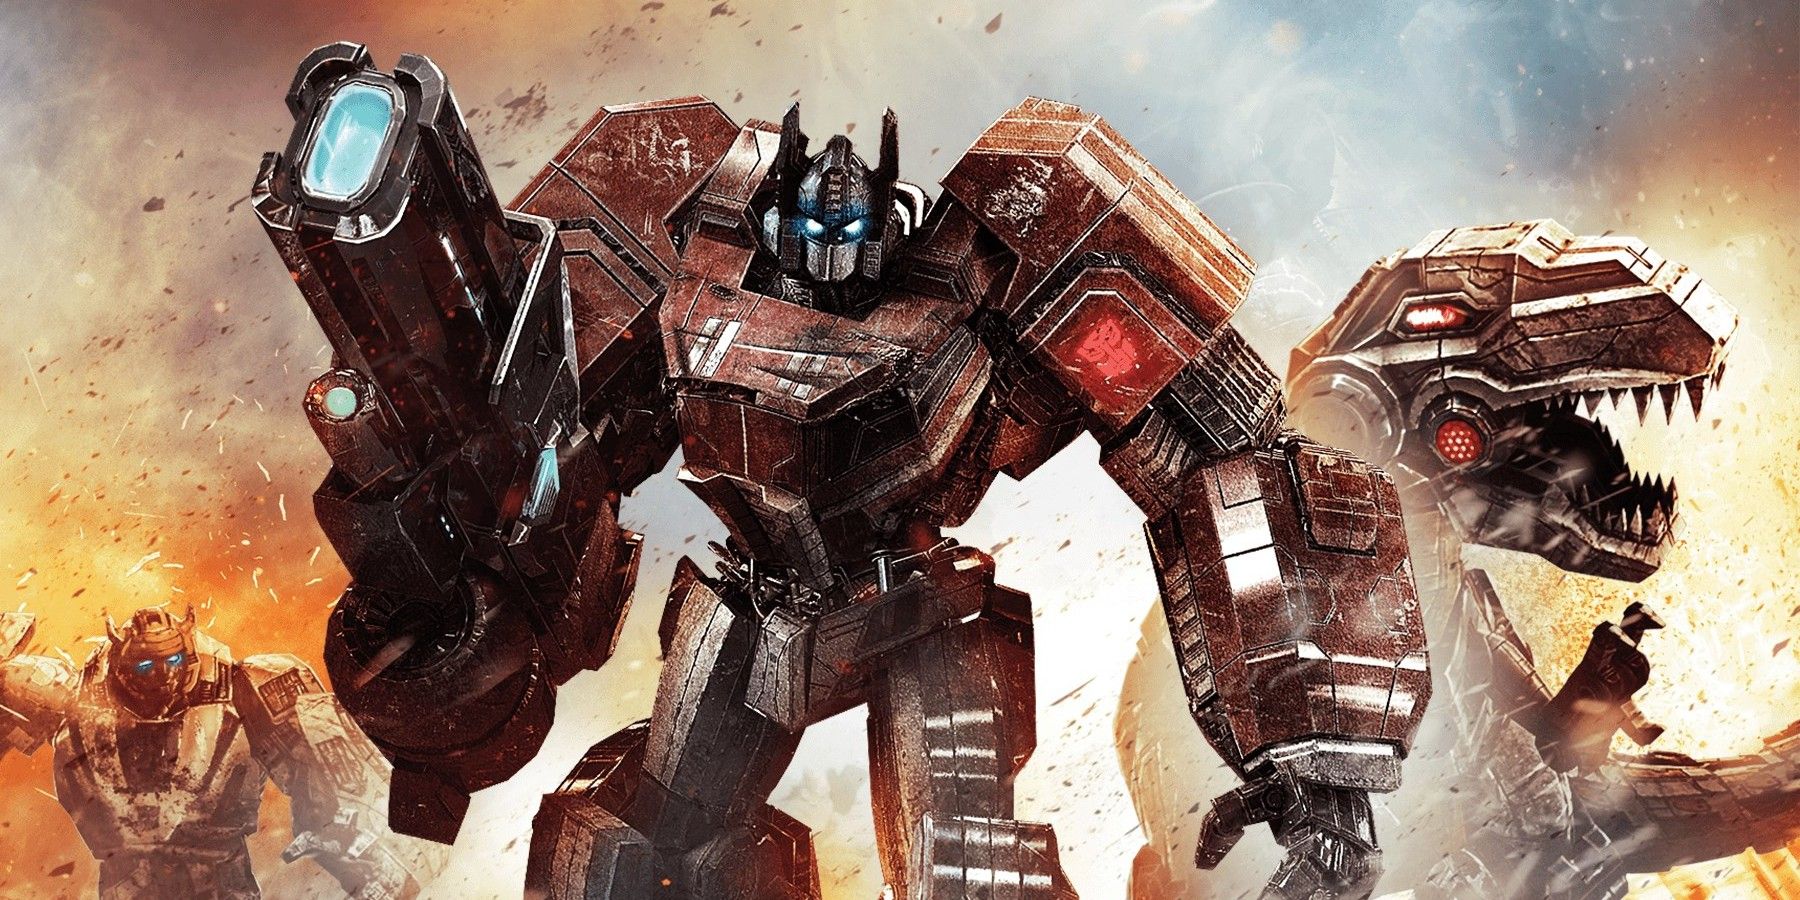 Optimus Prime, Grimlock and Bumblebee on the cover artwork for Transformers: Fall Of Cybertron